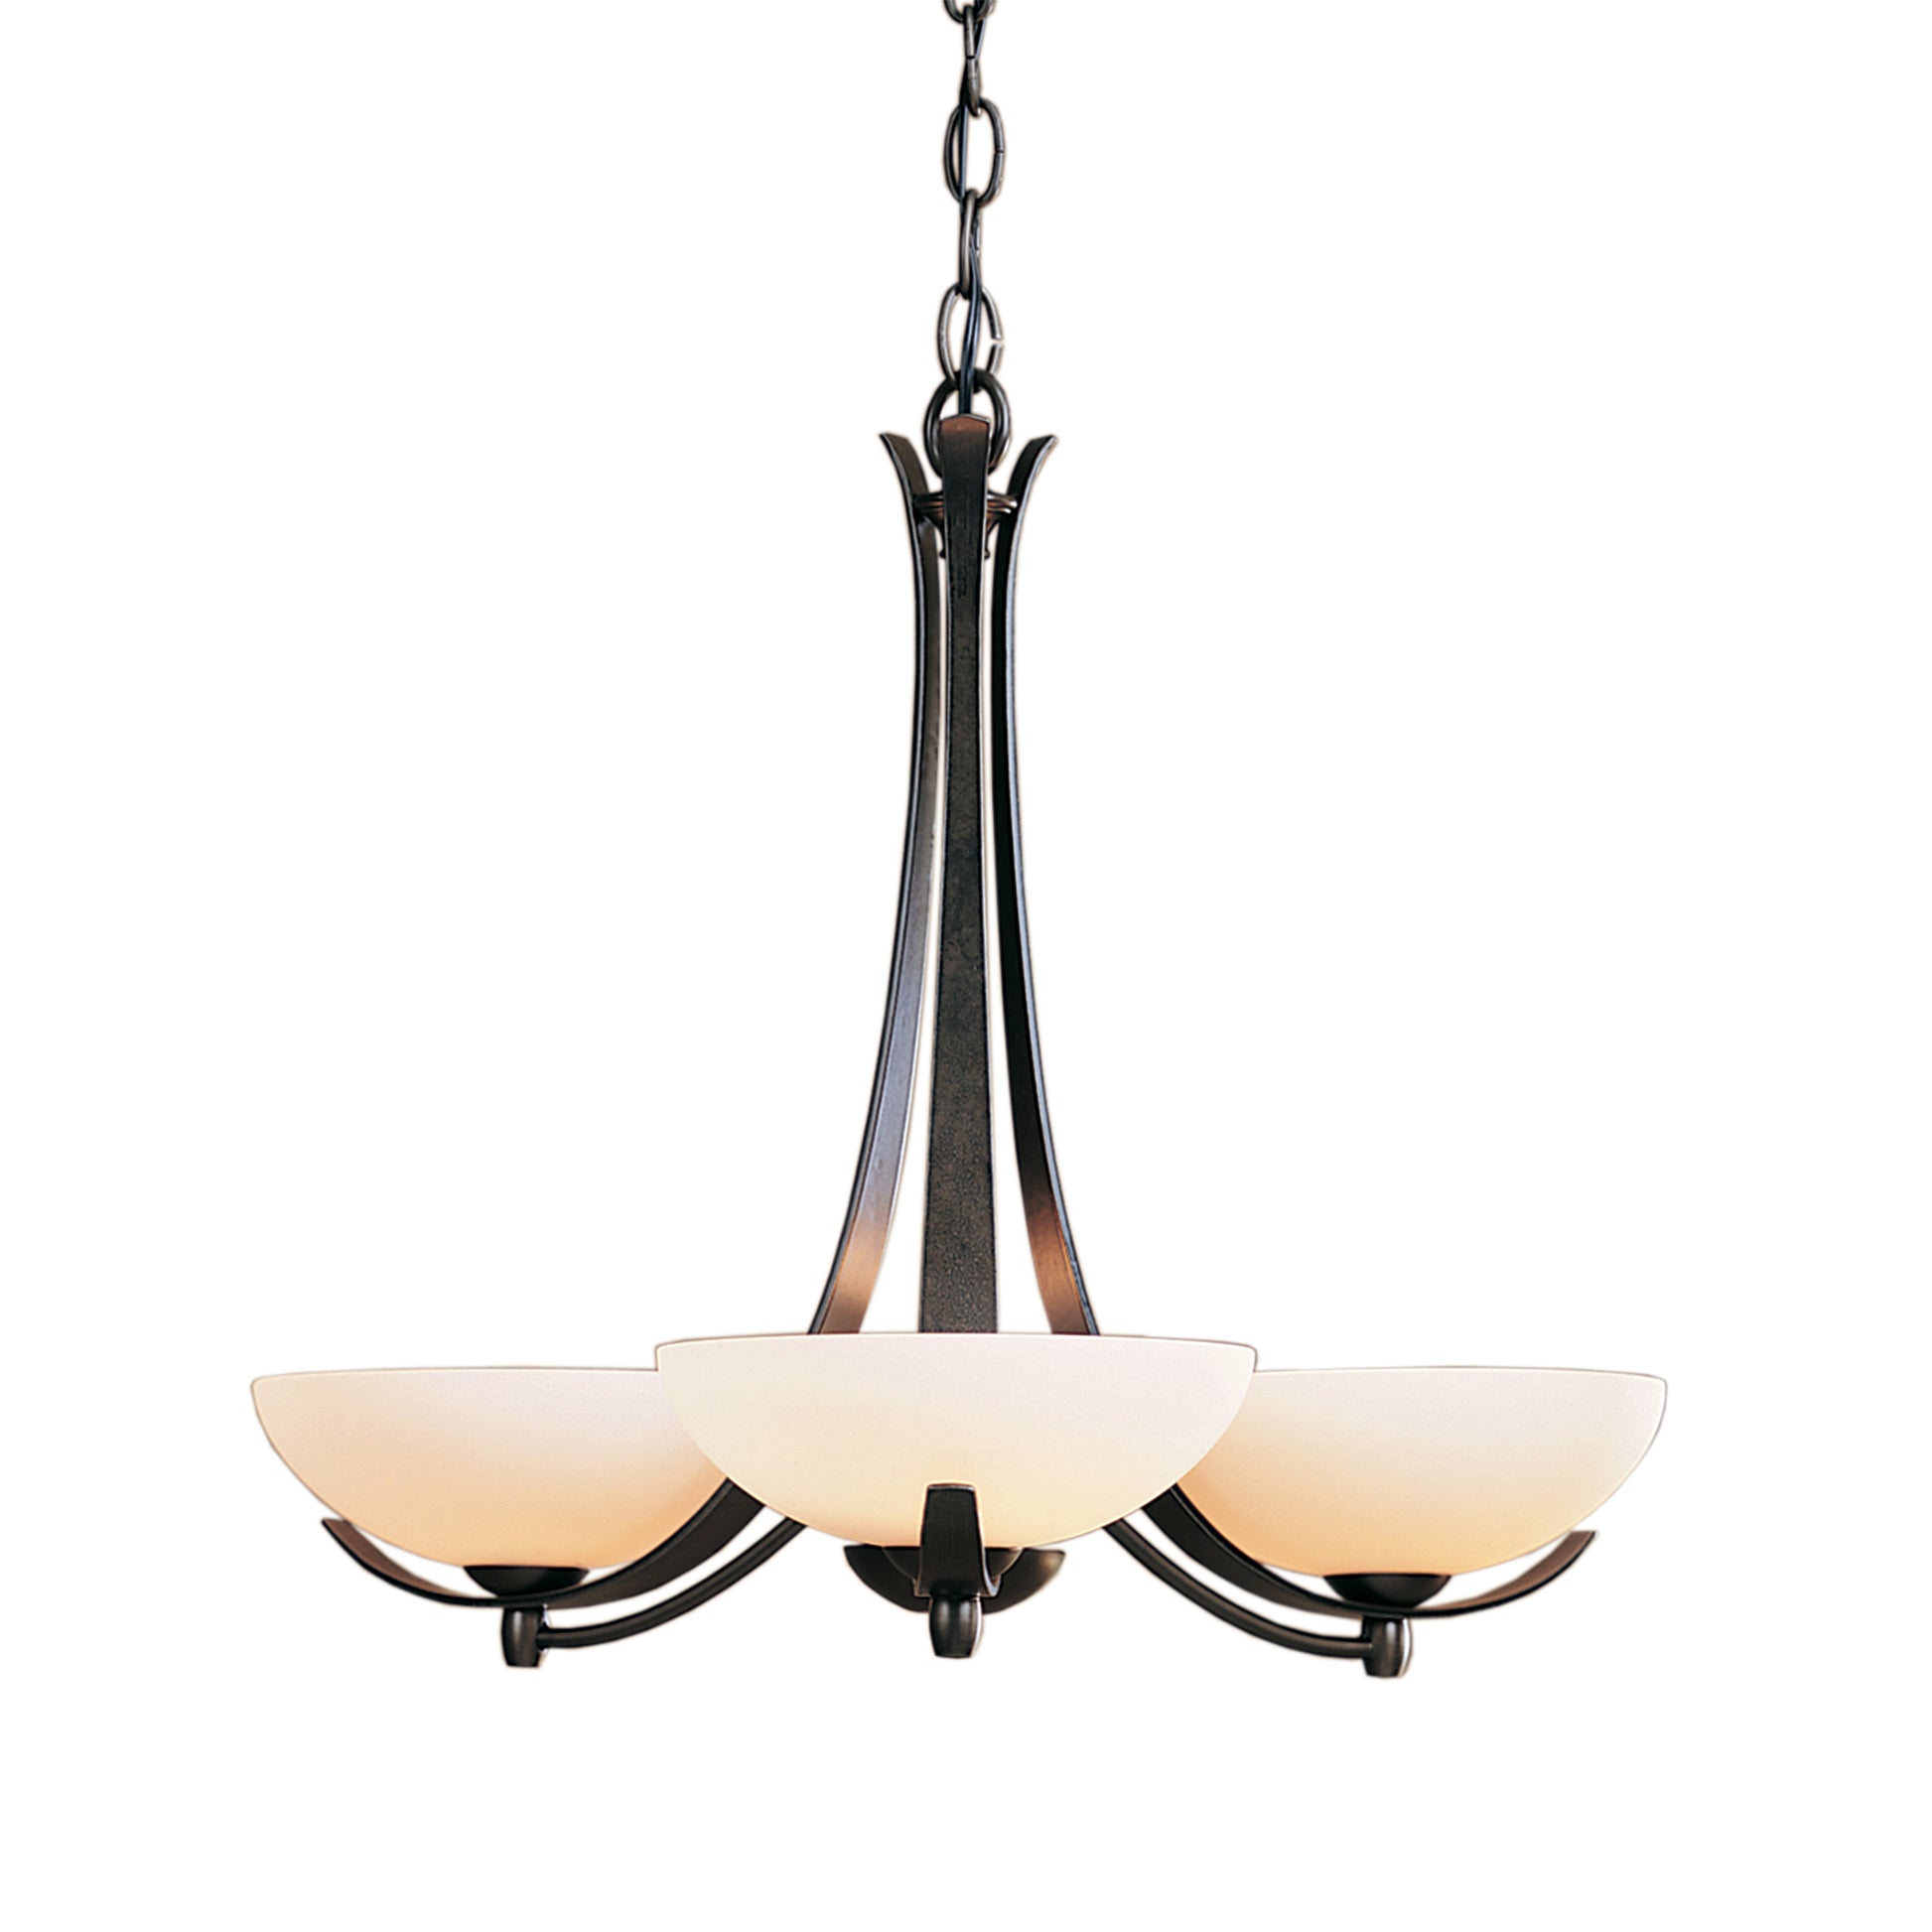 The Hubbardton Forge Aegis Chandelier, featuring hand-forged arms, showcases a stunning three light design with frosted glass shades.